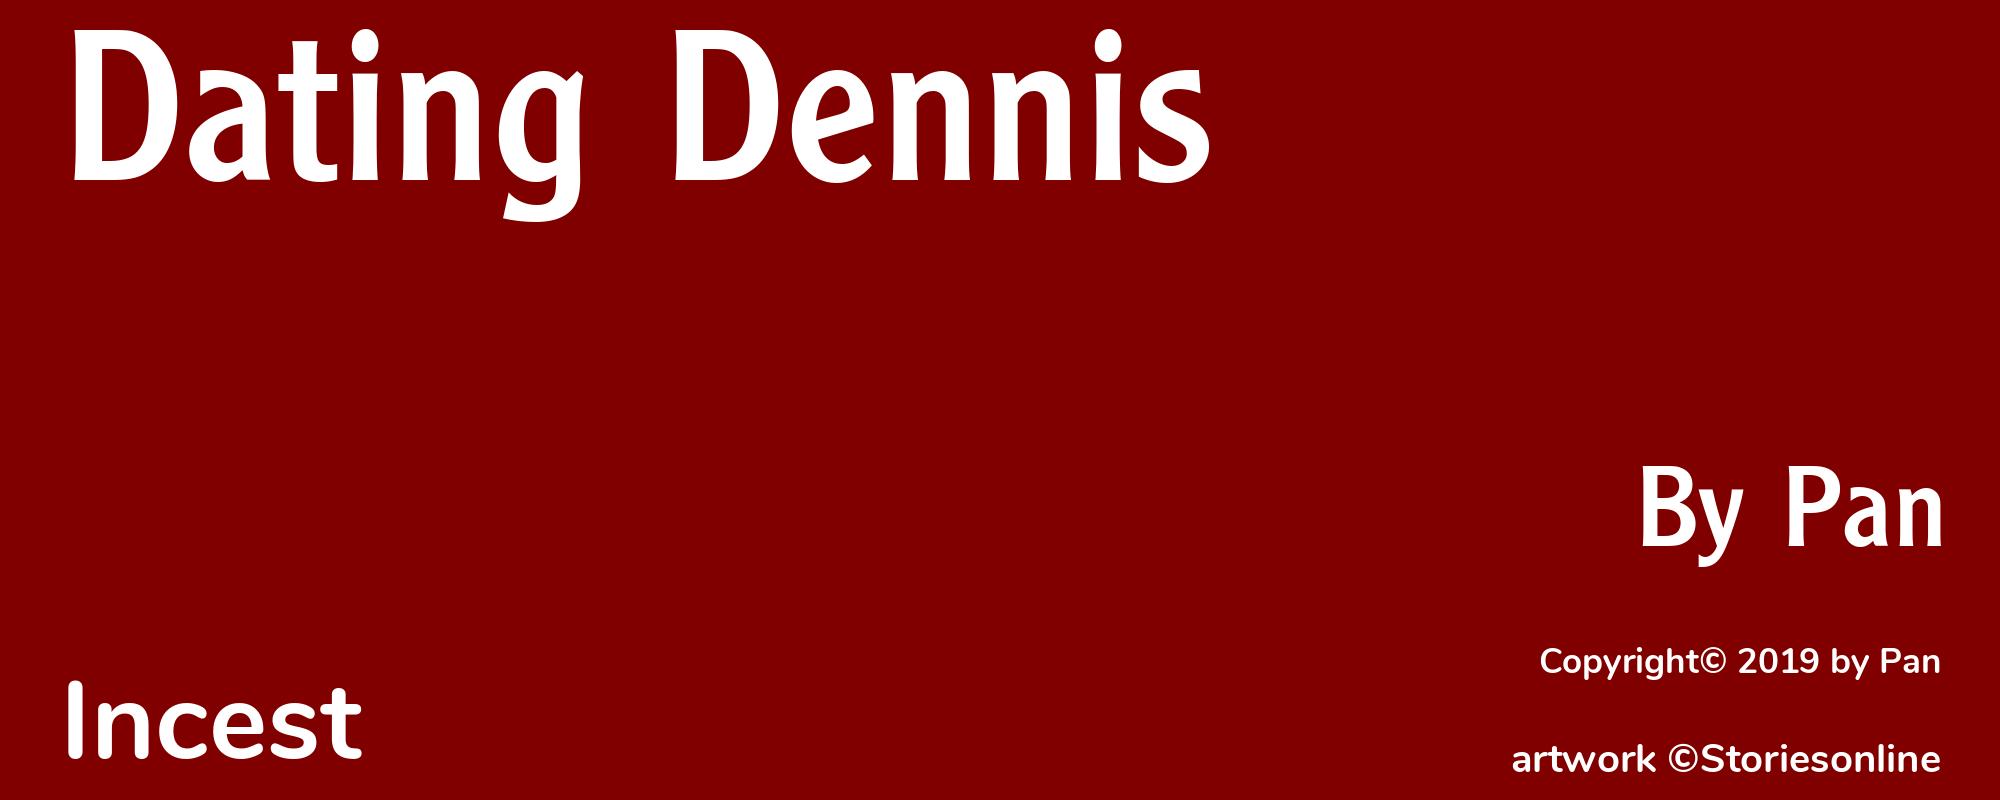 Dating Dennis - Cover